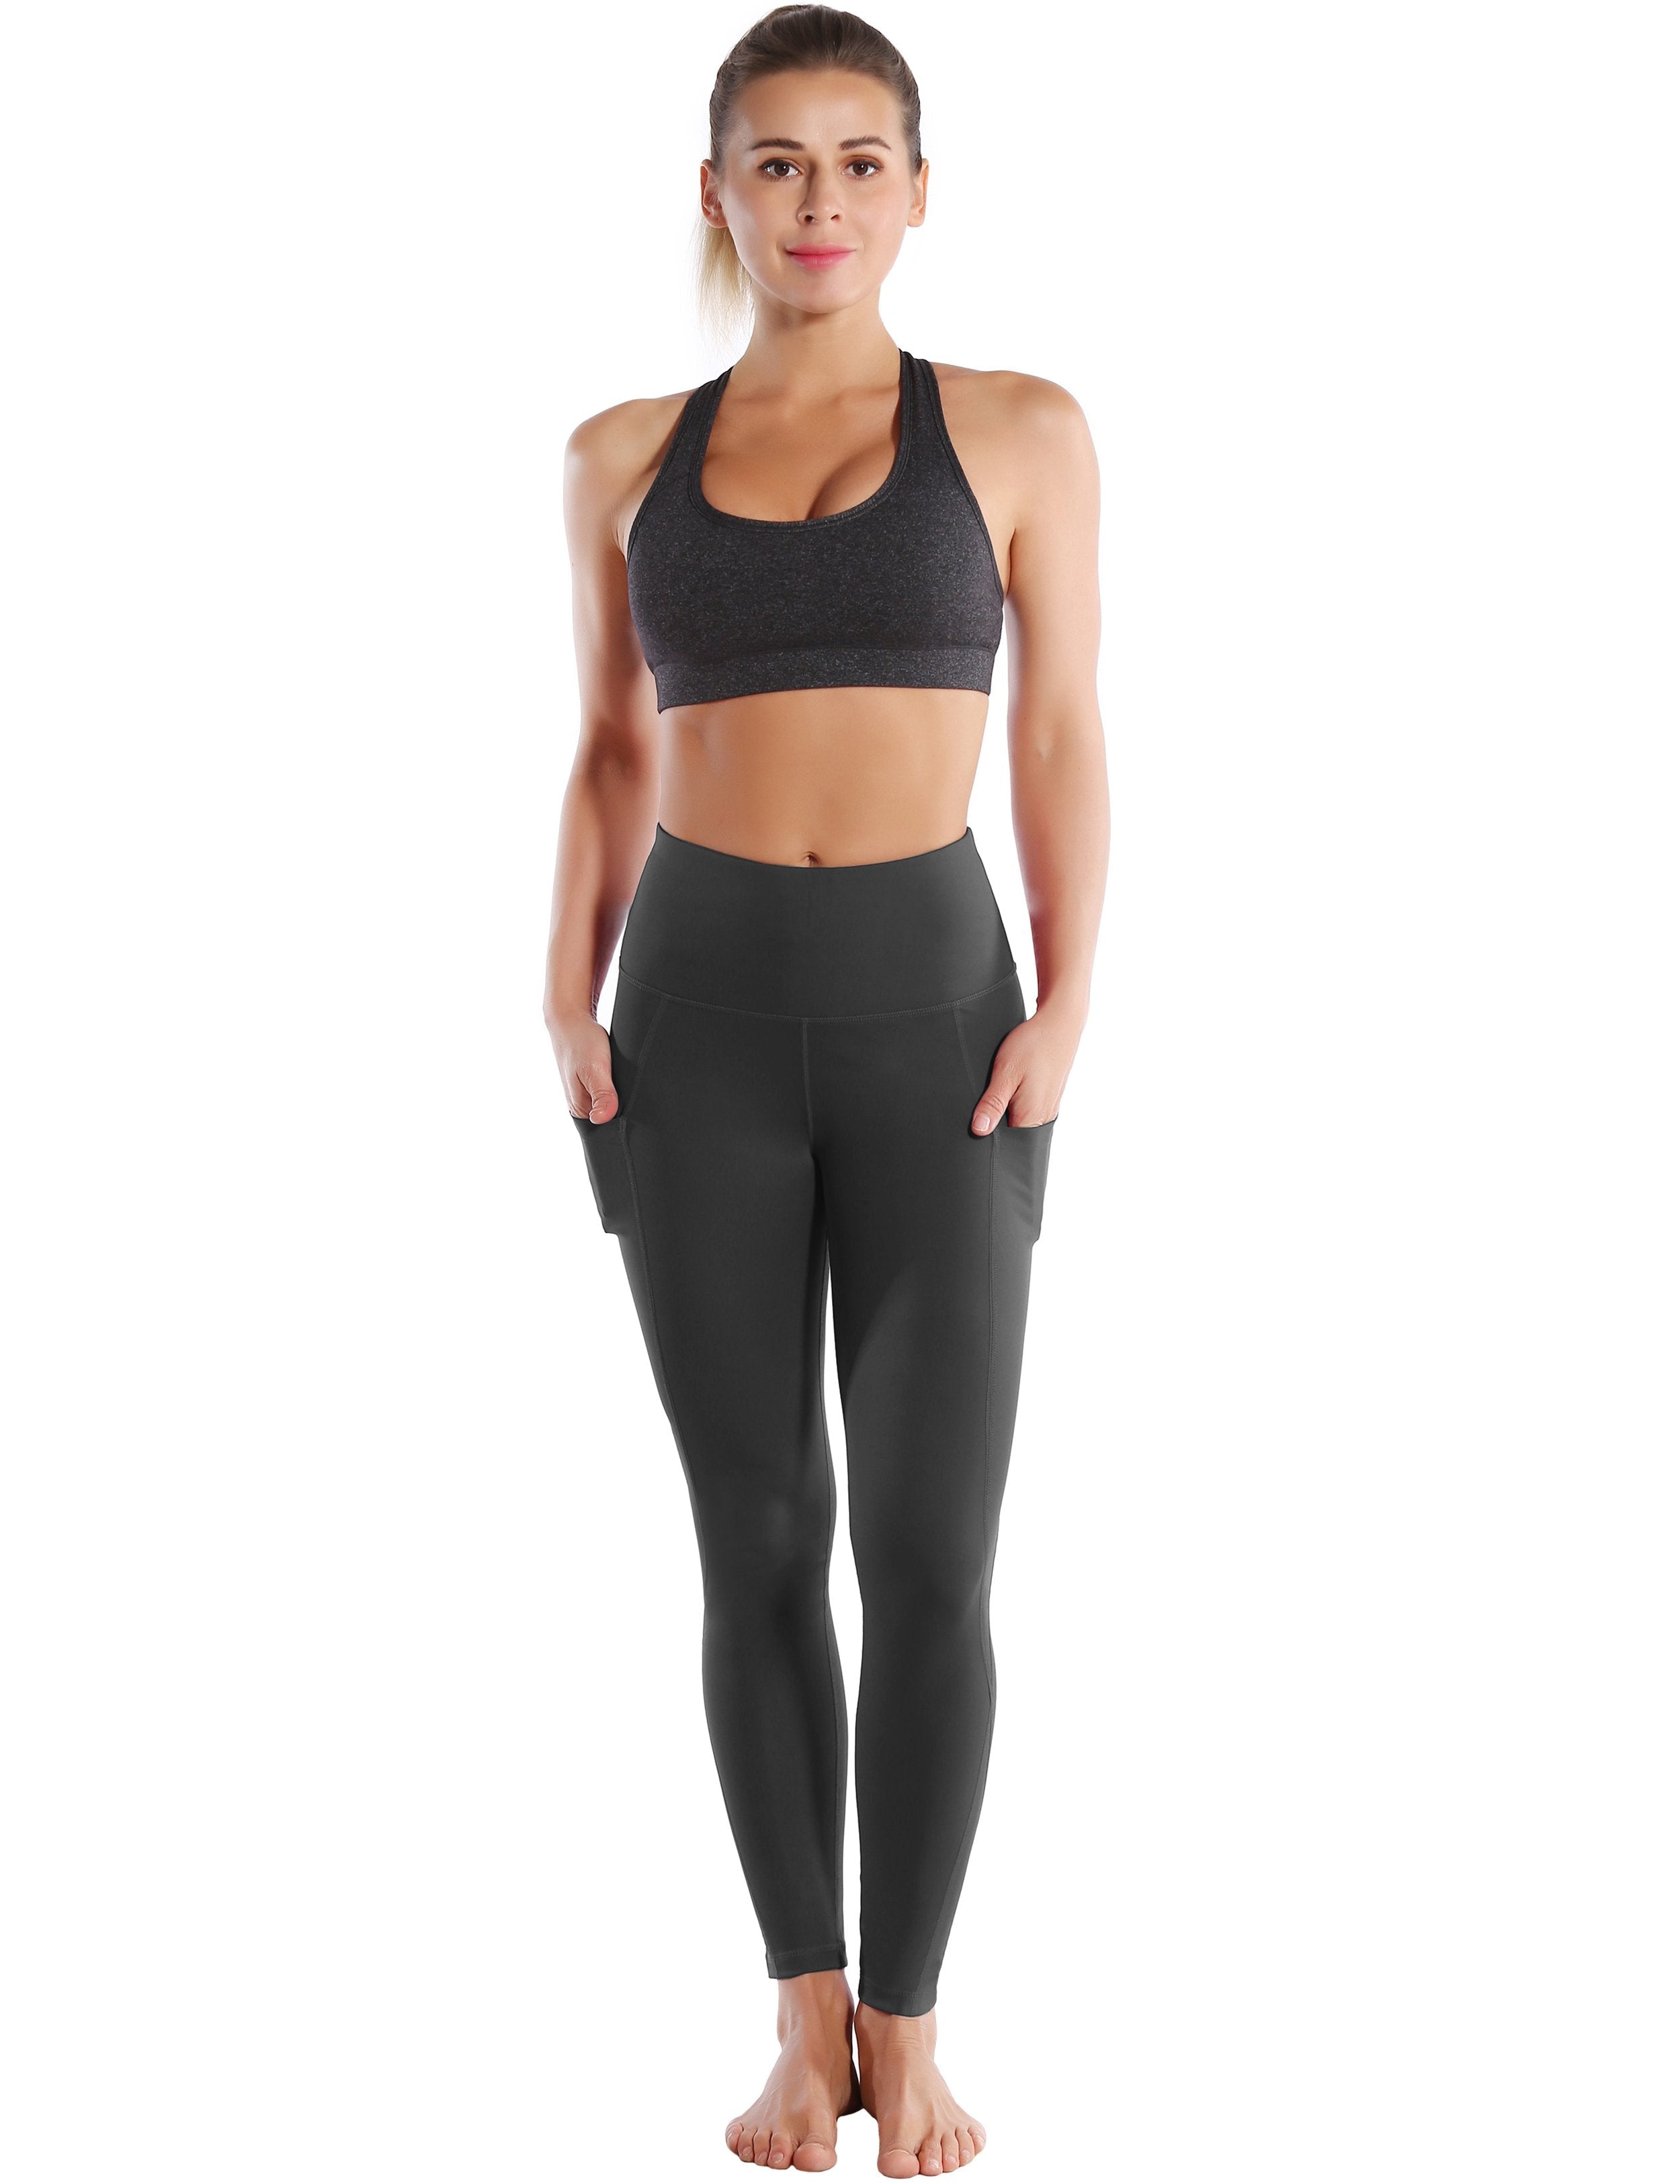 High Waist Side Pockets Pilates Pants shadowcharcoal 75% Nylon, 25% Spandex Fabric doesn't attract lint easily 4-way stretch No see-through Moisture-wicking Tummy control Inner pocket